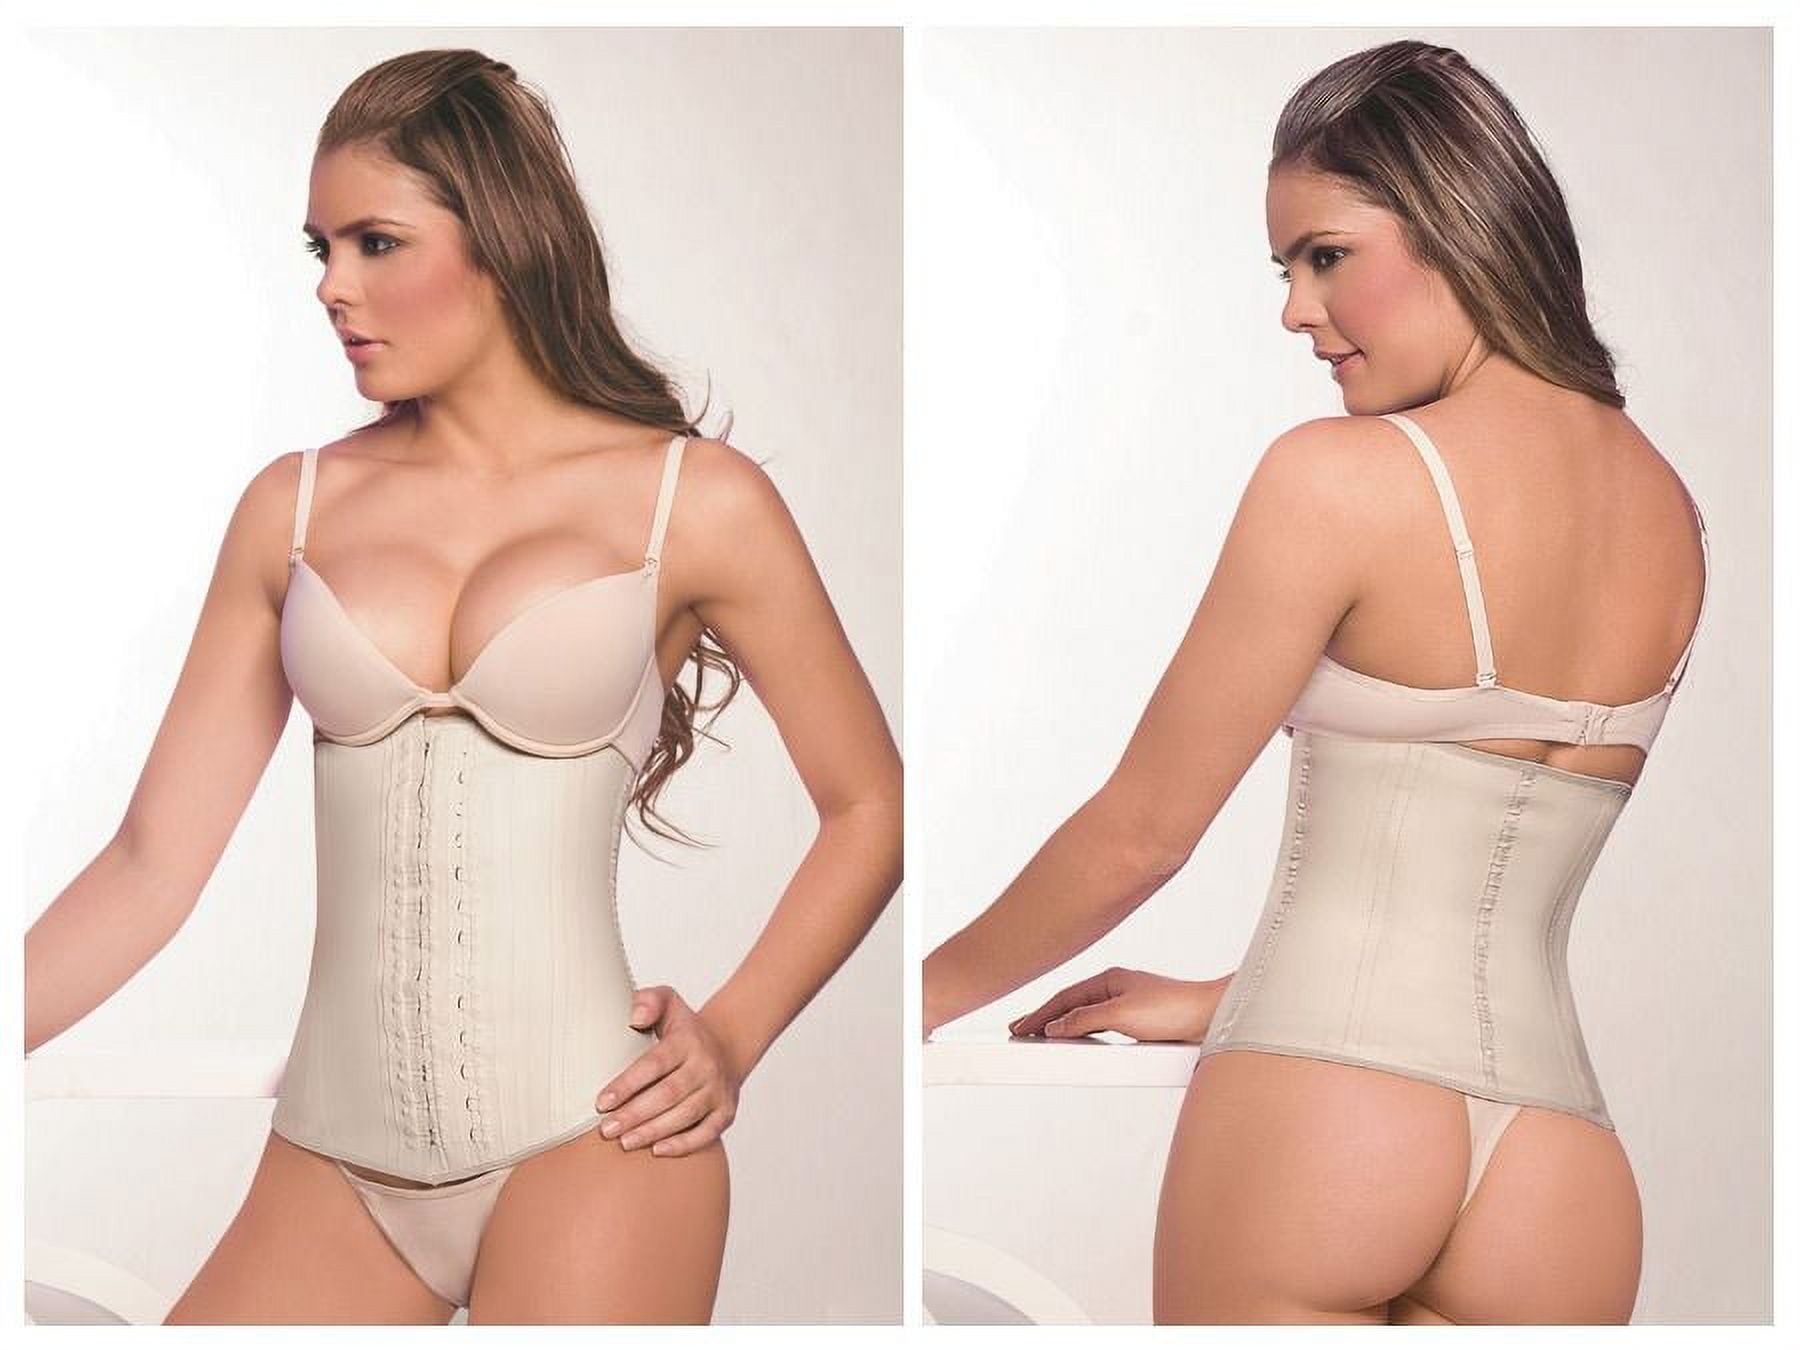  Women's Body Shapers Skin Color Latex Vest Girdle with